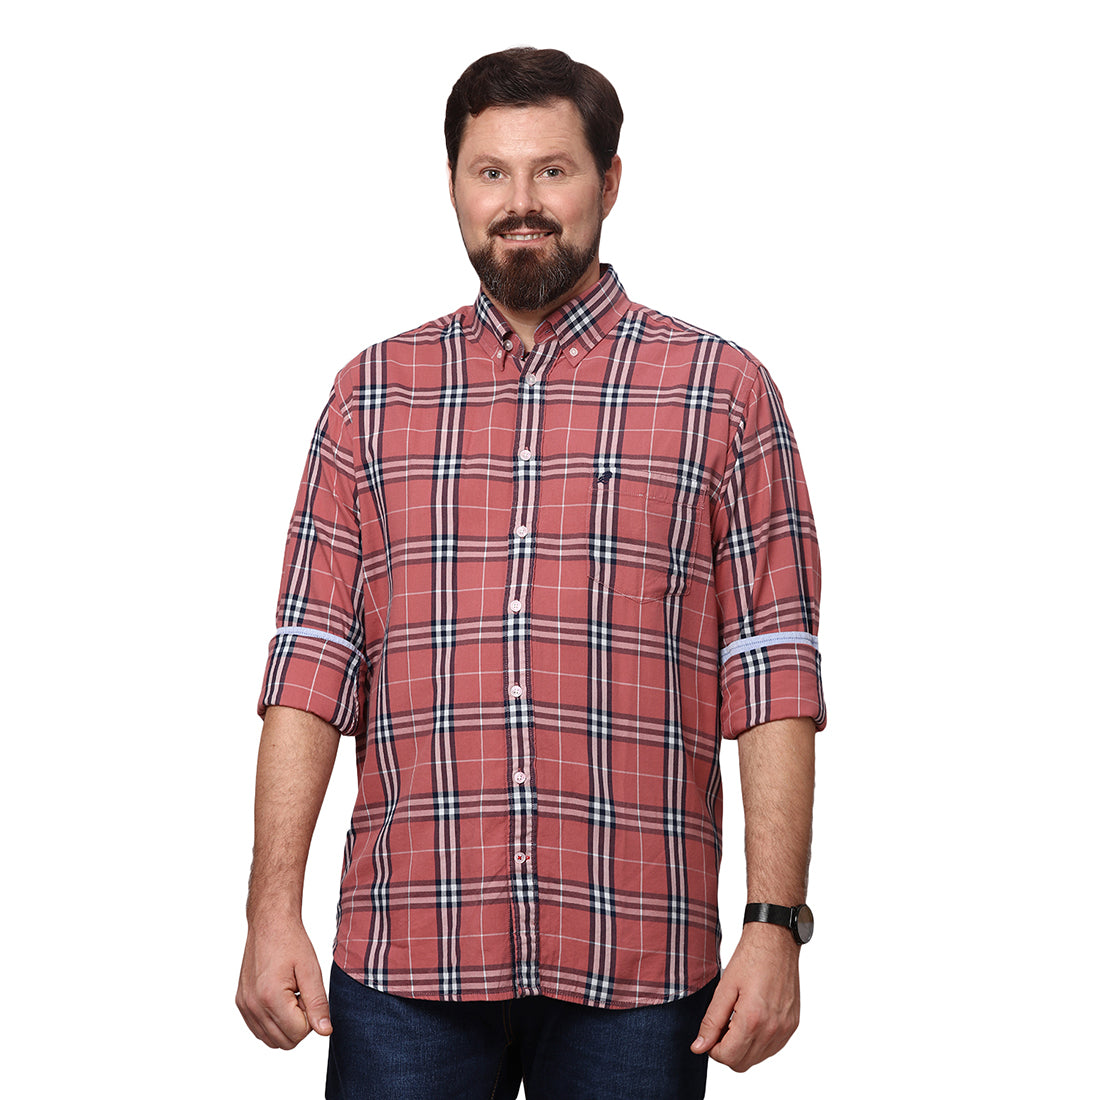 Big & Bold Checks Rust Full Sleeves Slim Fit Casual Shirts (Plus Size) - Double Two